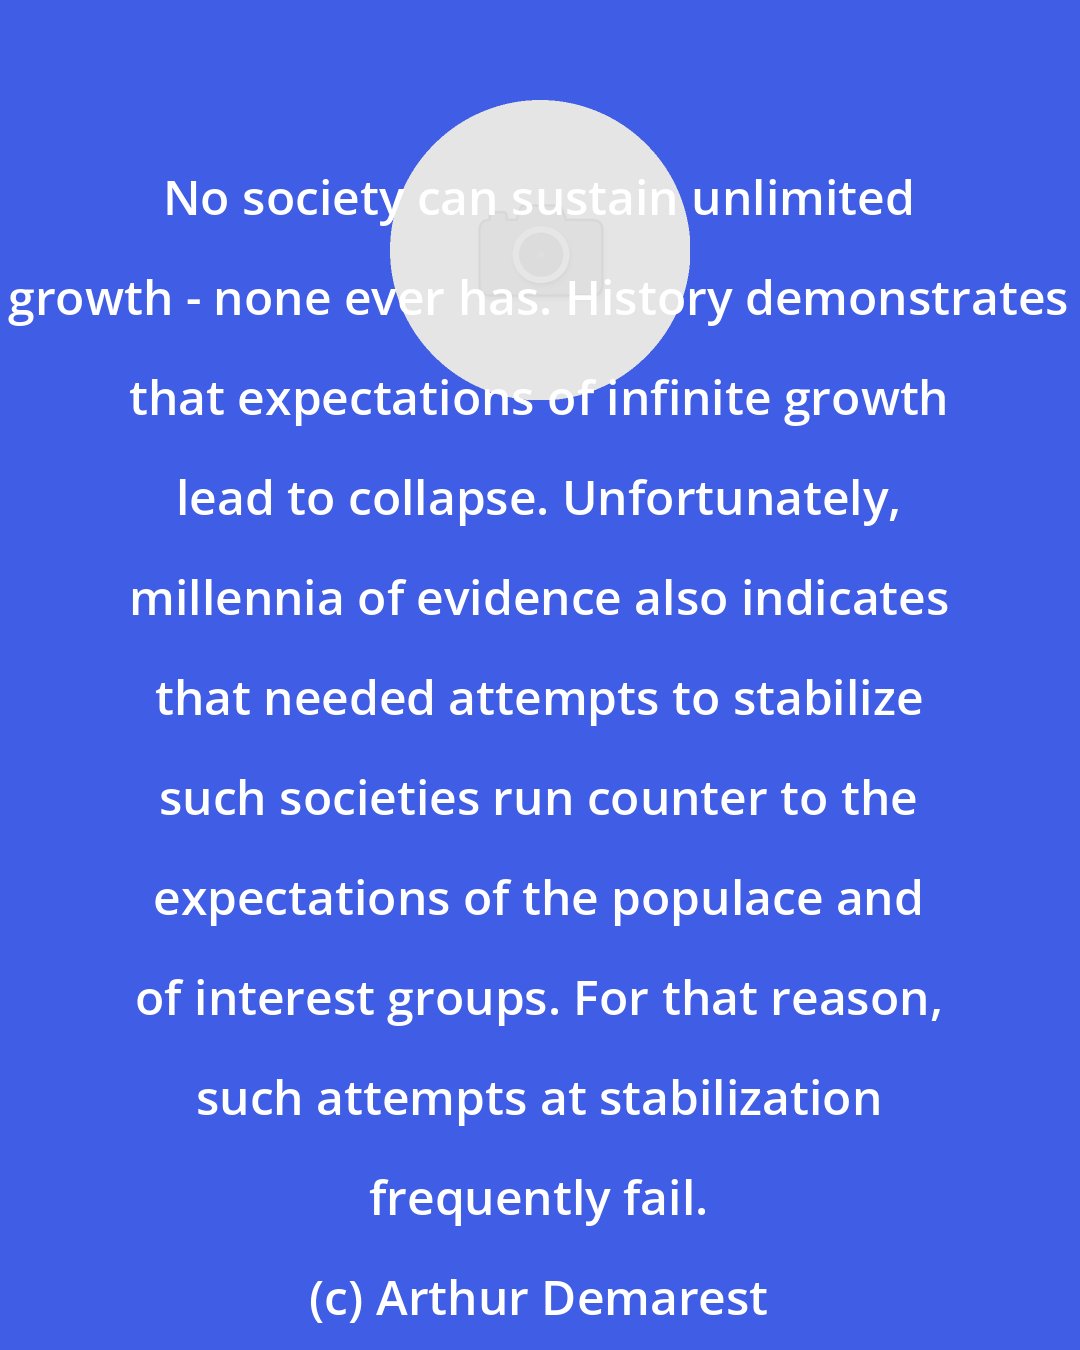 Arthur Demarest: No society can sustain unlimited growth - none ever has. History demonstrates that expectations of infinite growth lead to collapse. Unfortunately, millennia of evidence also indicates that needed attempts to stabilize such societies run counter to the expectations of the populace and of interest groups. For that reason, such attempts at stabilization frequently fail.